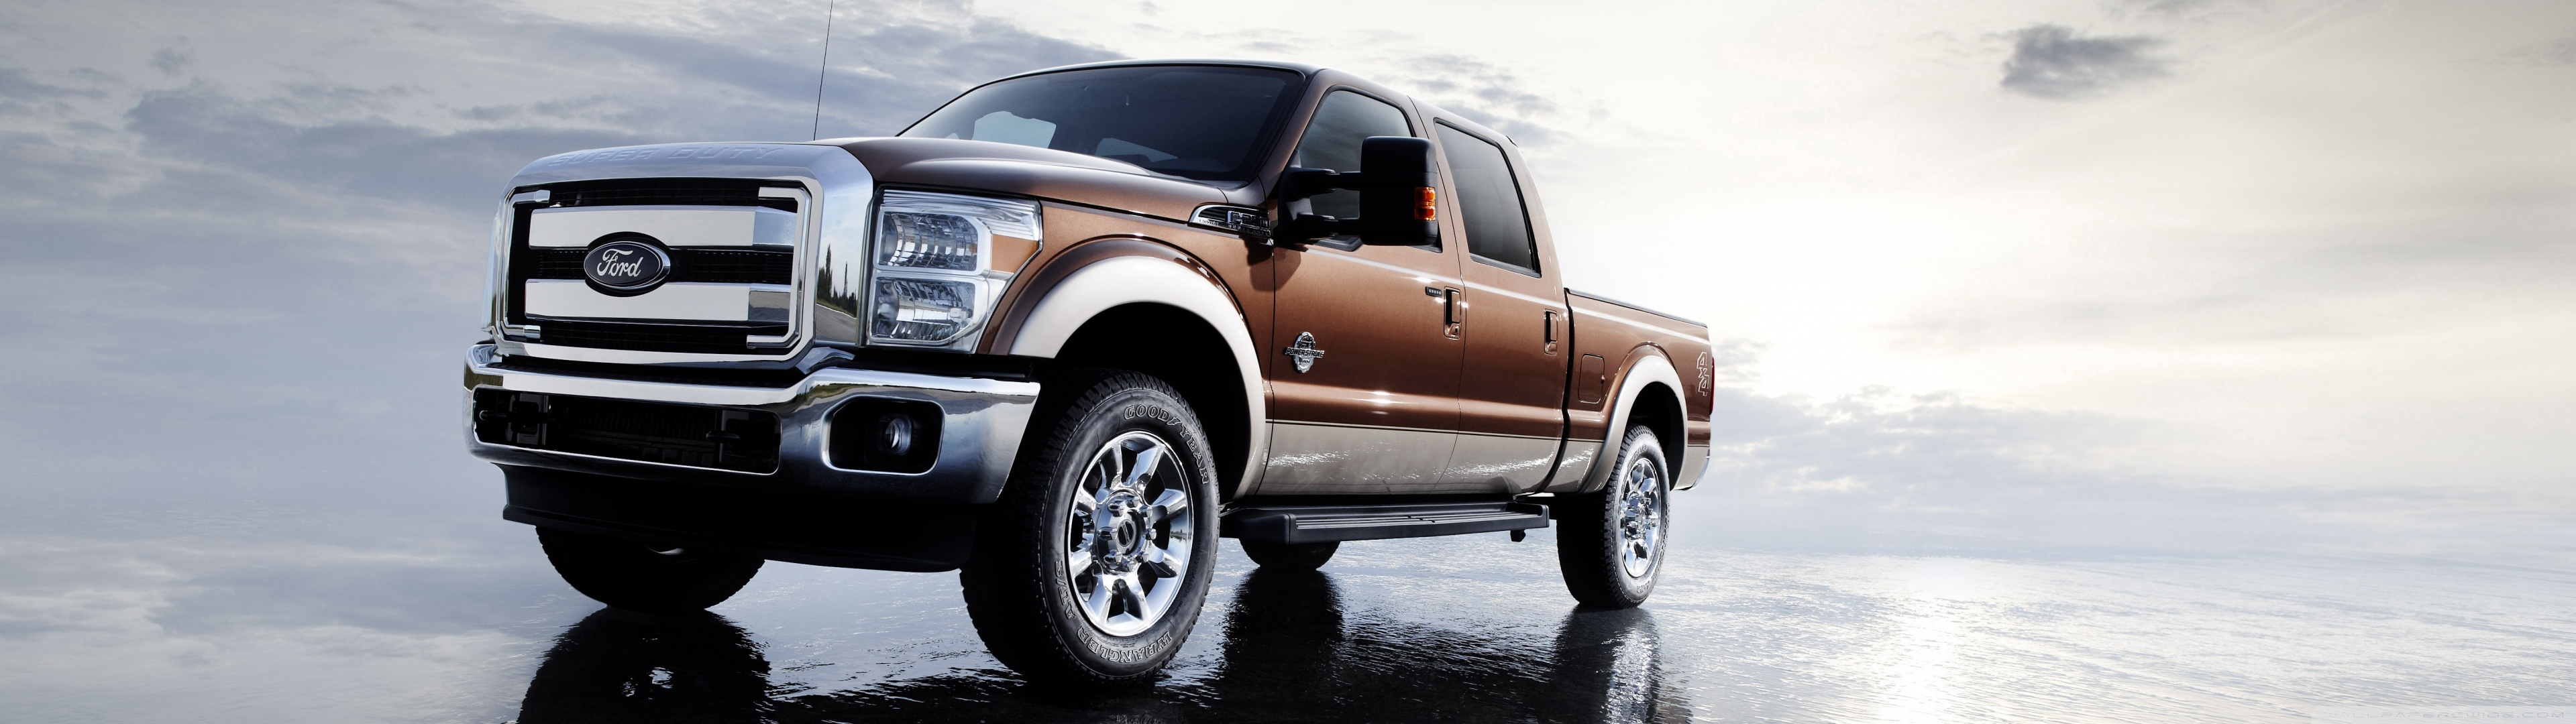 Ford F 250 Super Duty Ultra Hd Desktop Background Wallpaper For Multi Display Dual Monitor Tablet Smartphone